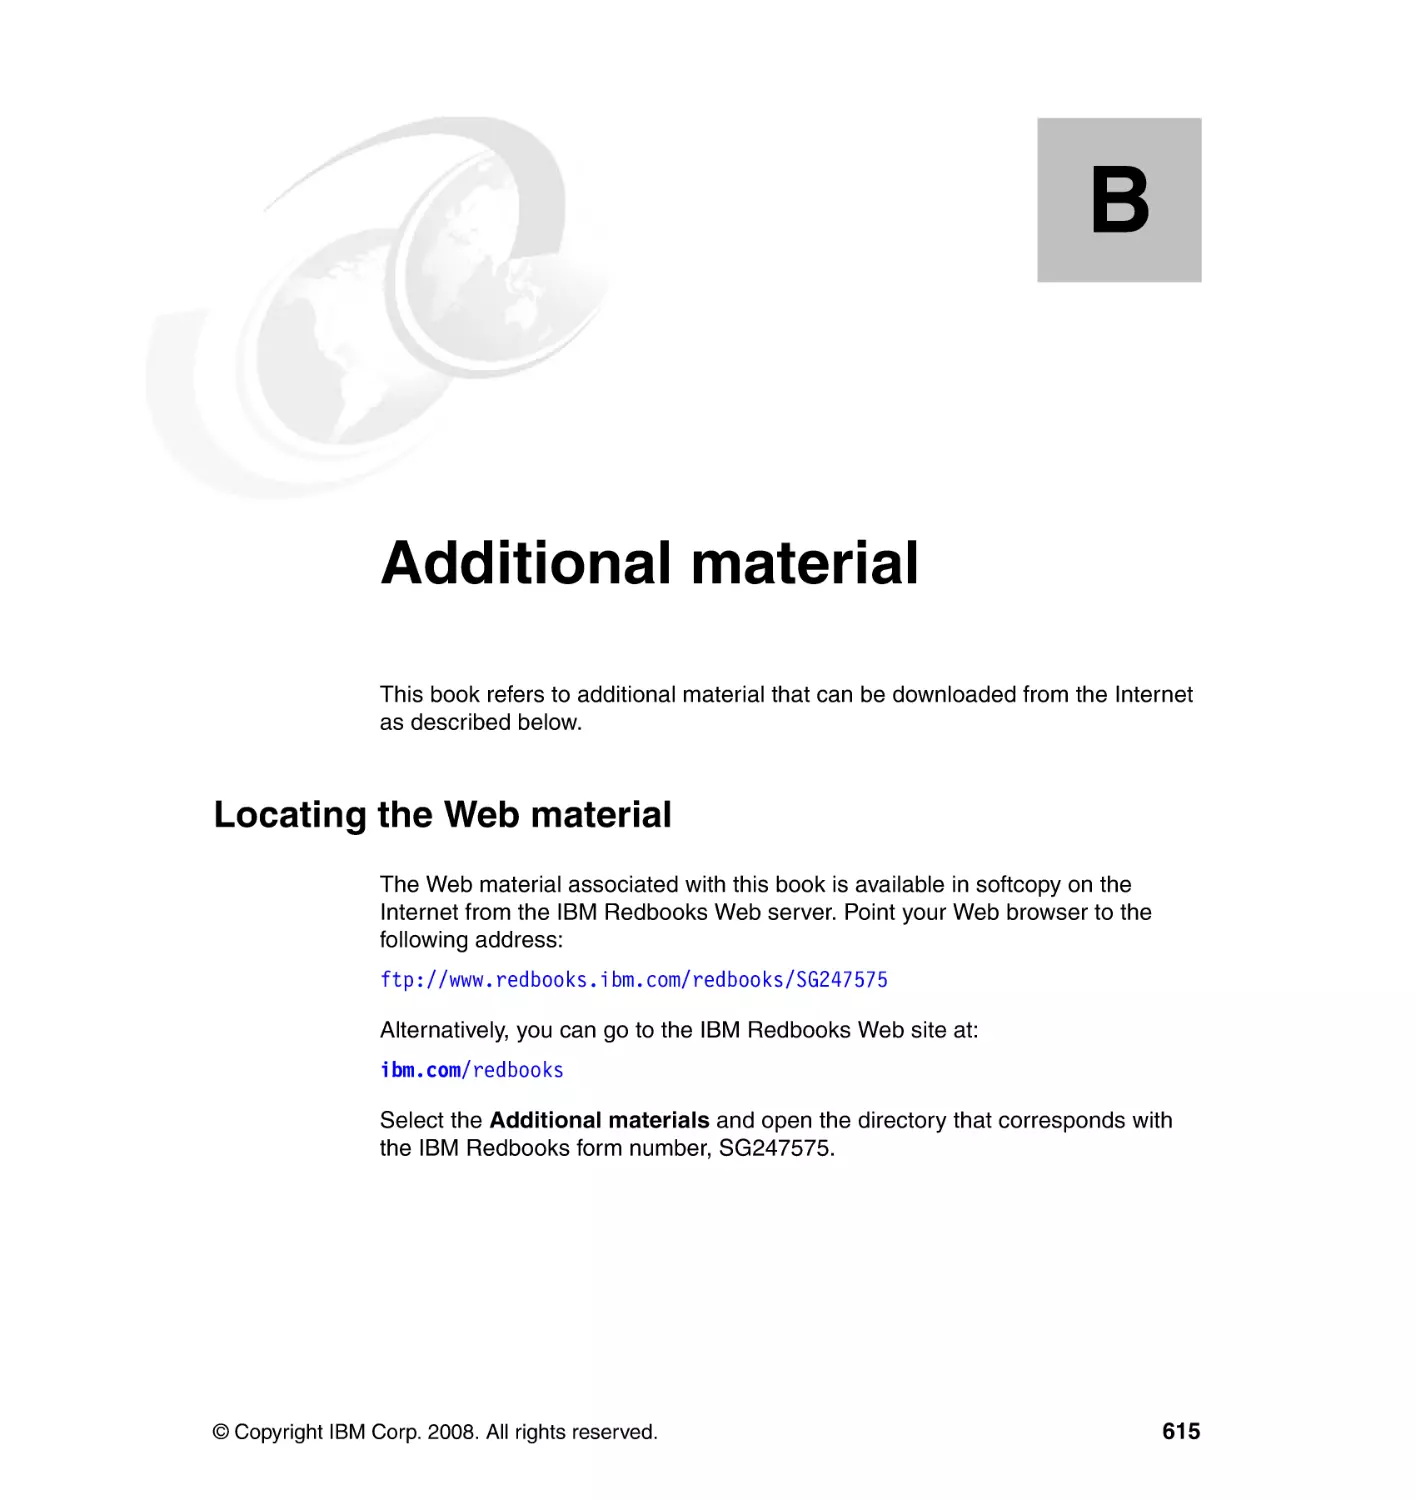 Appendix B. Additional material
Locating the Web material